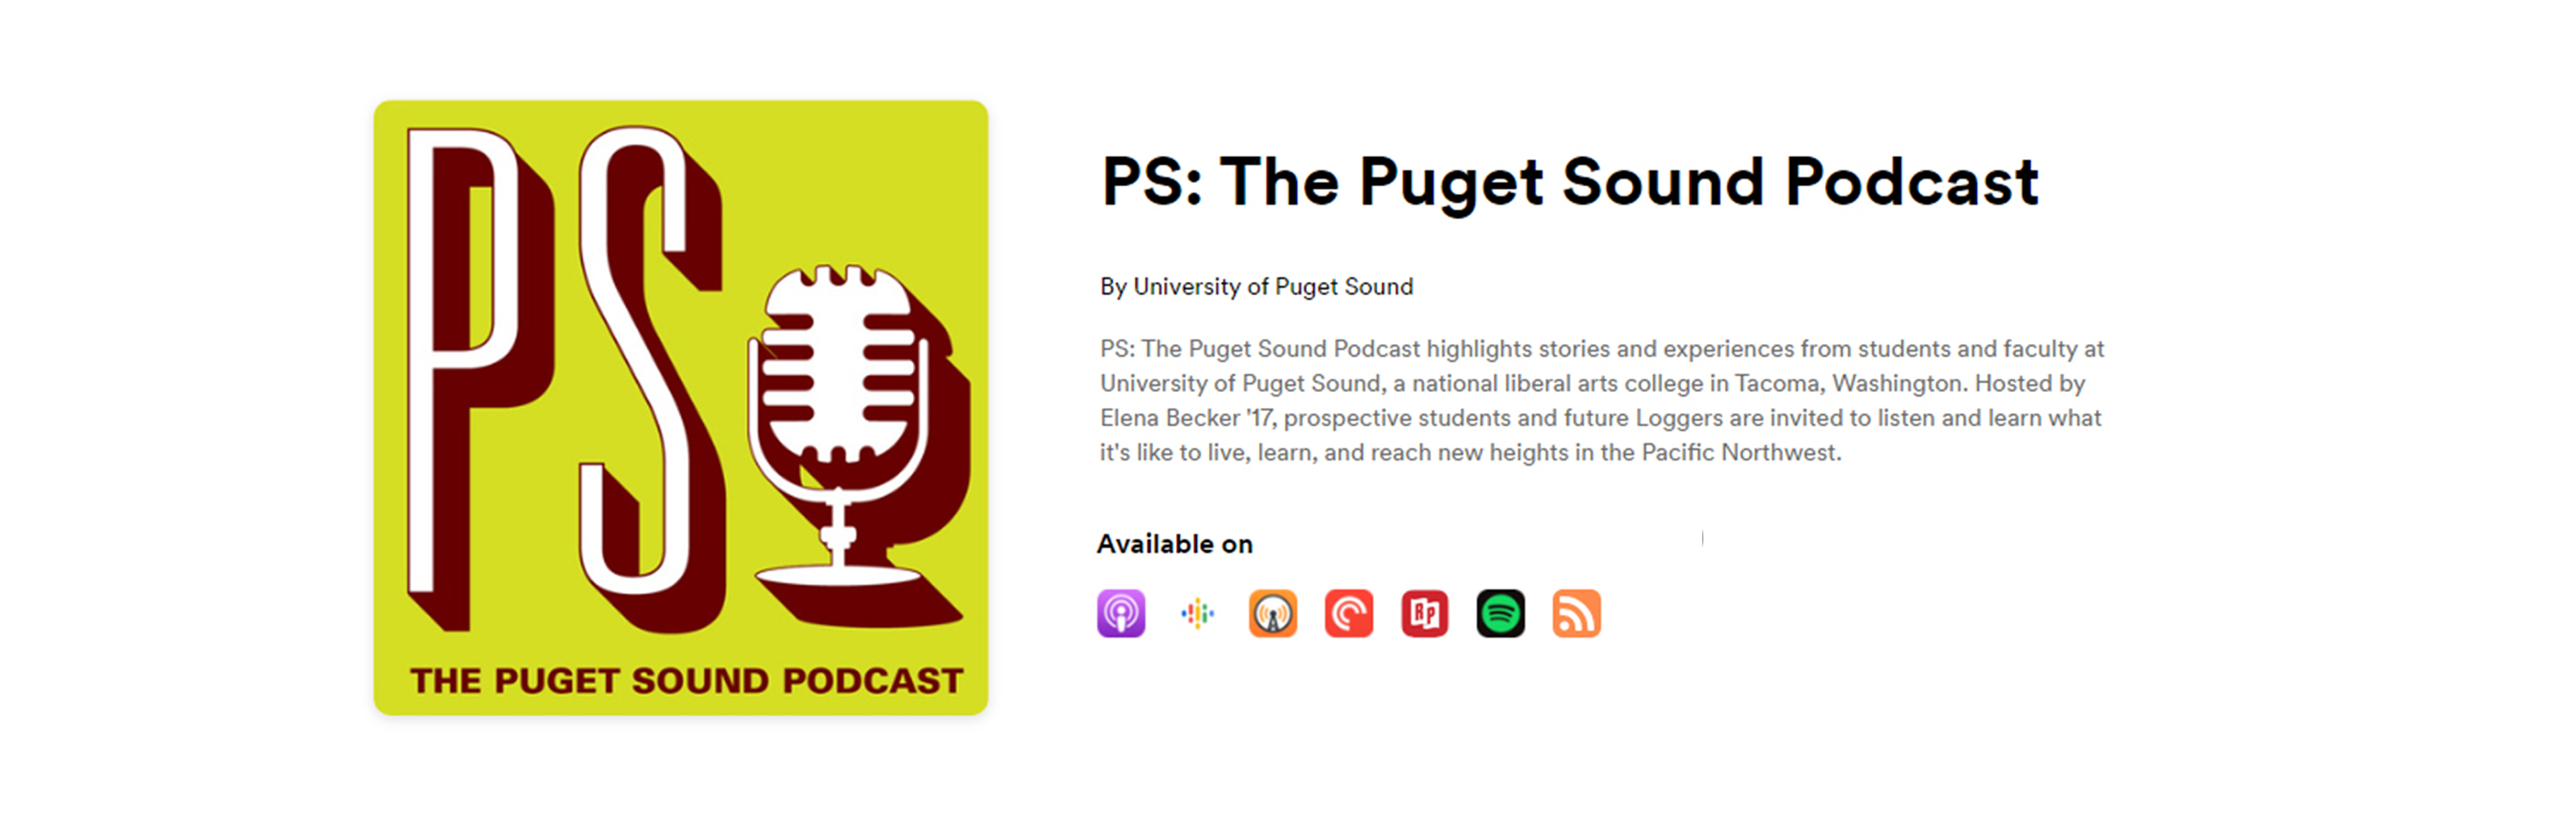 The Puget Sound Podcast